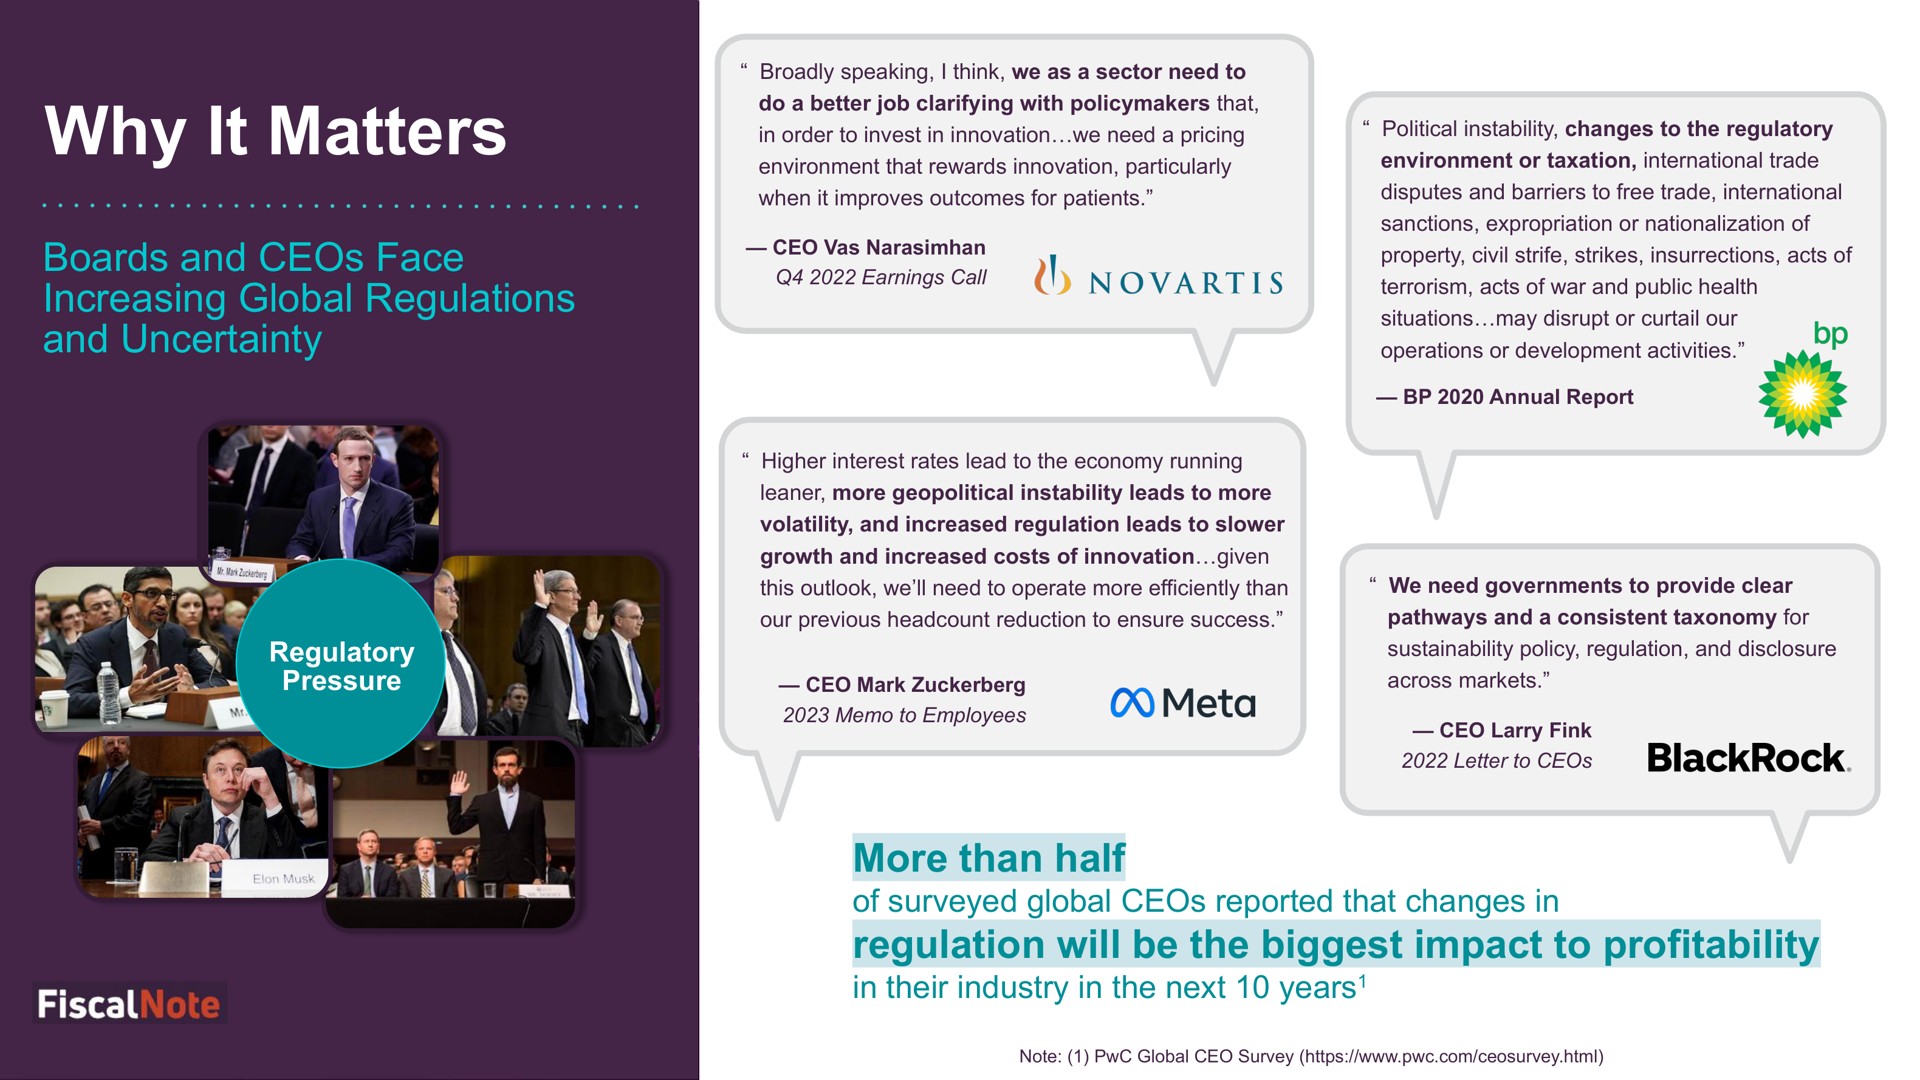 why it matters boards and face increasing global regulations and uncertainty more than half regulation will be the biggest impact to profitability | FiscalNote